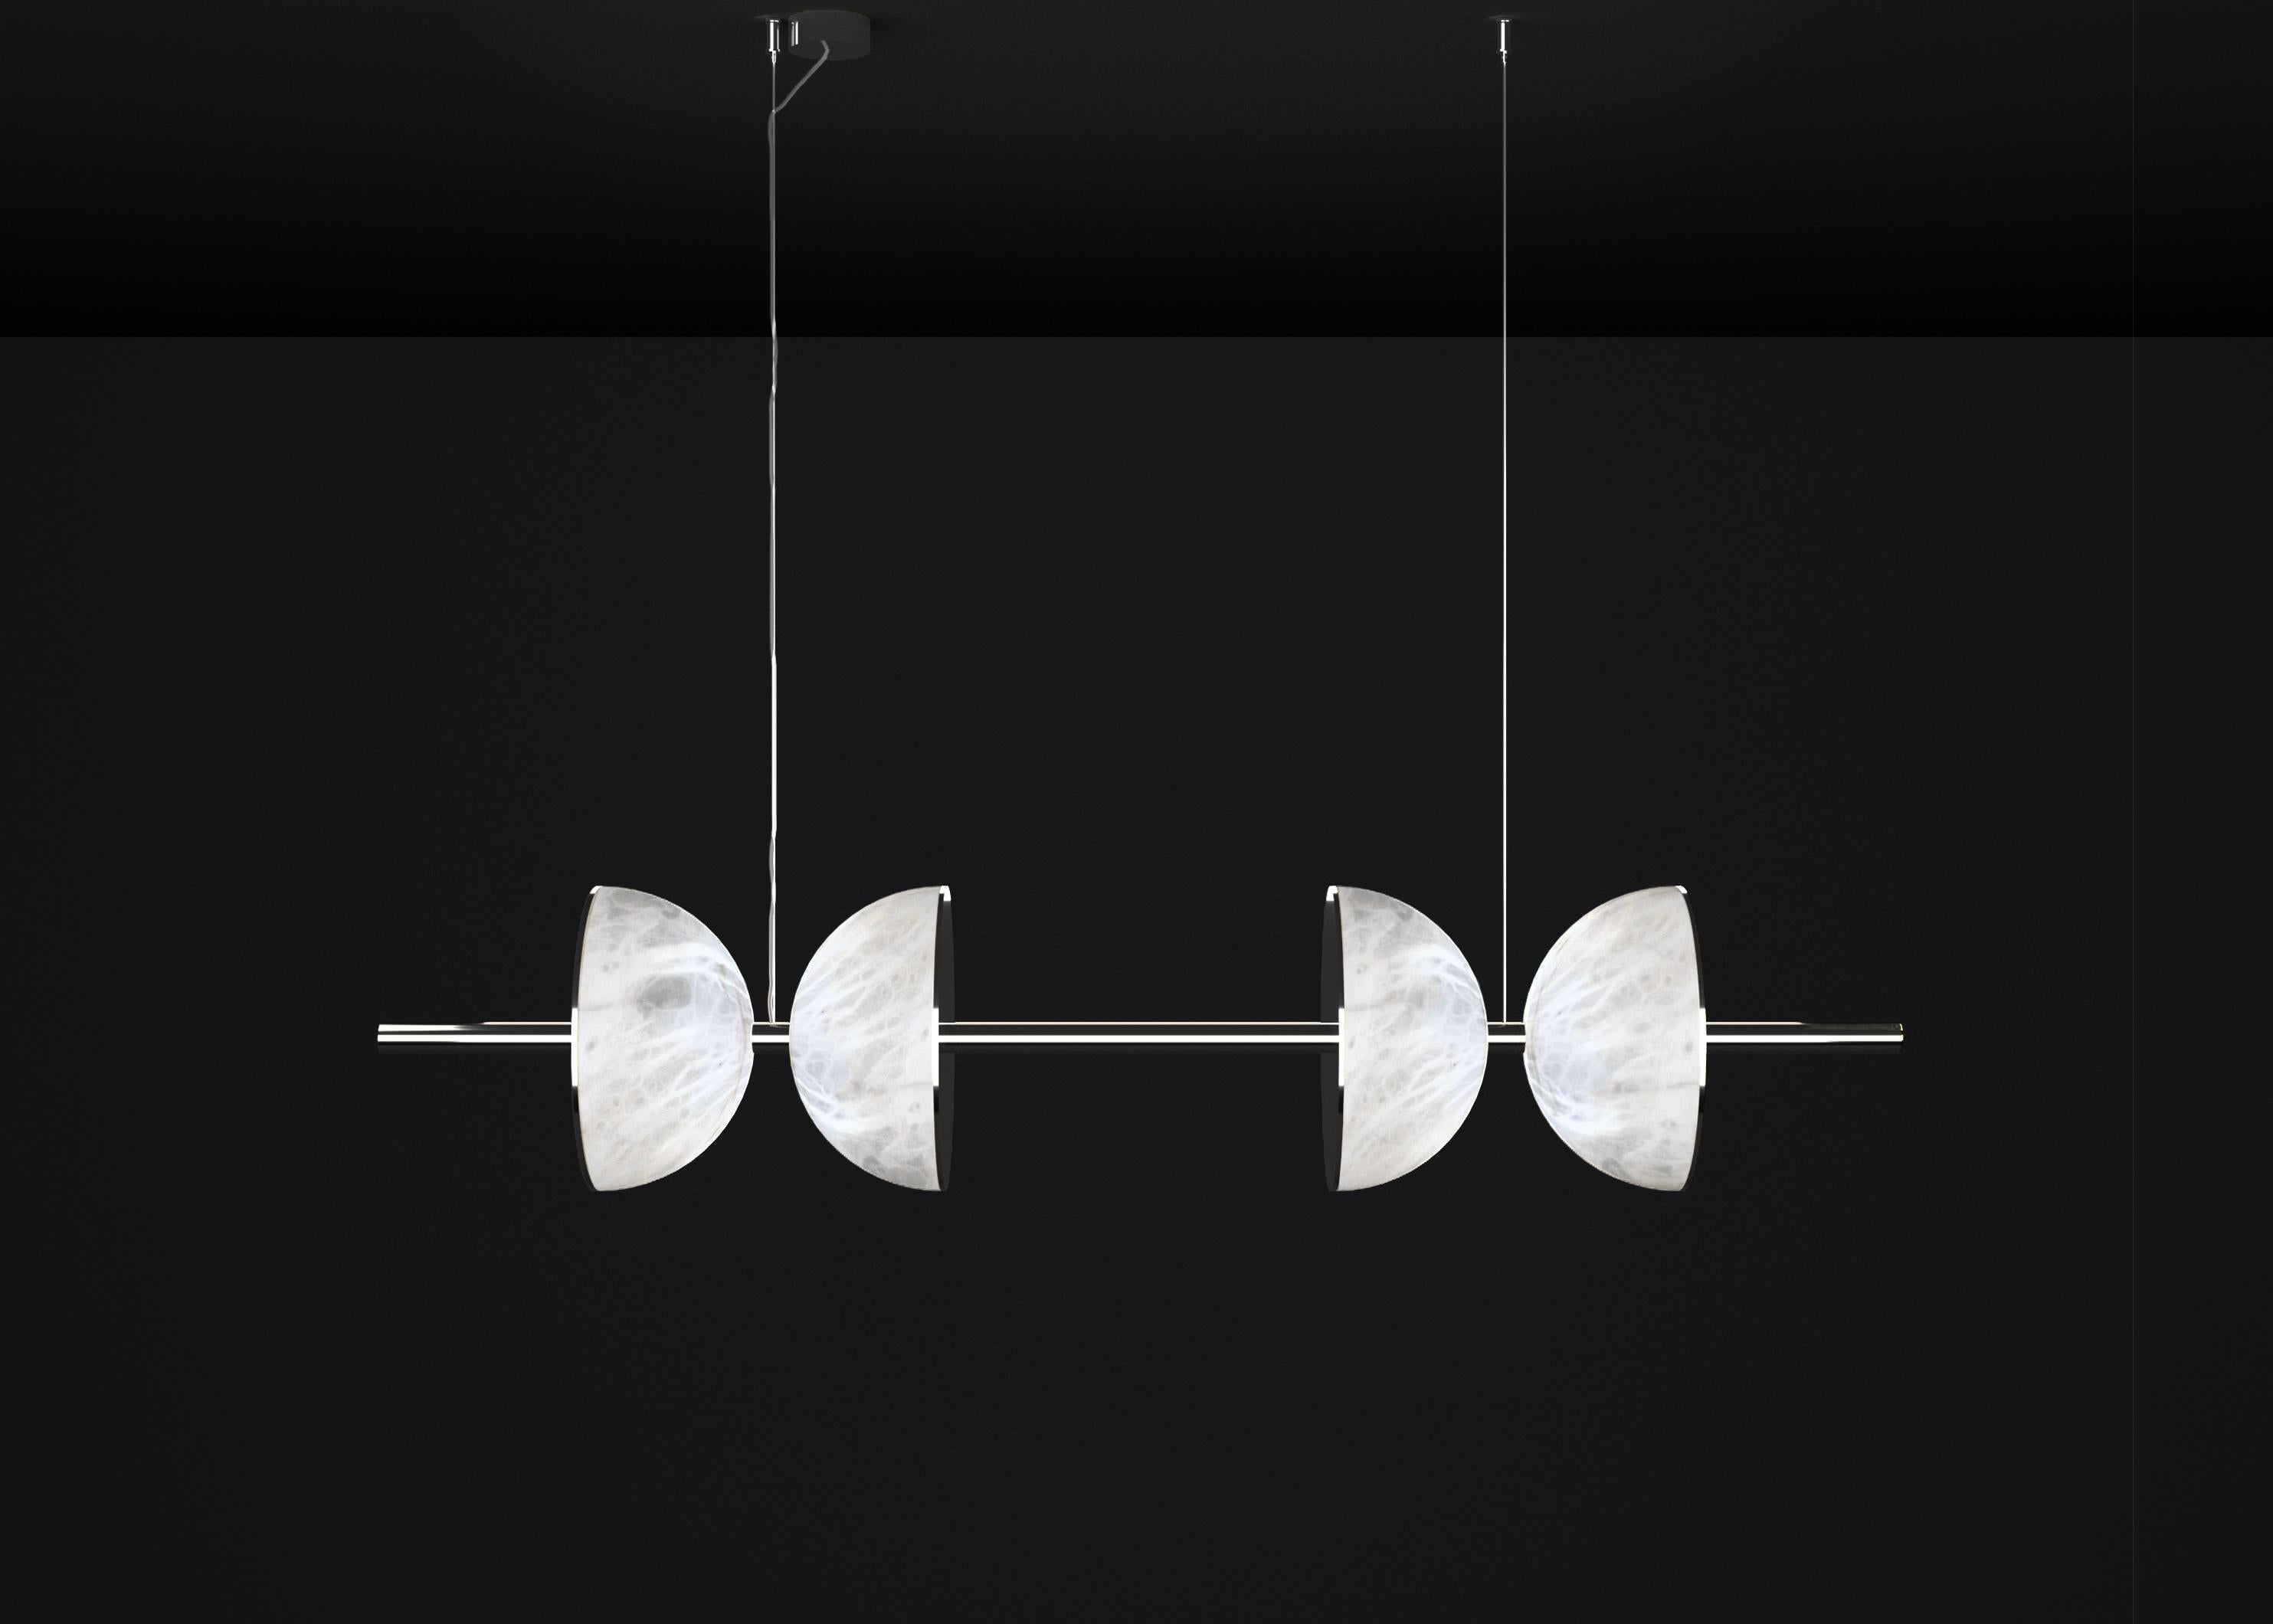 Ermes Shiny Silver Metal And Alabaster Pendant Light 2 by Alabastro Italiano
Dimensions: D 30 x W 150 x H 300 cm.
Materials: White alabaster and shiny silver metal.

Available in different finishes: Shiny Silver, Bronze, Brushed Brass, Ruggine of